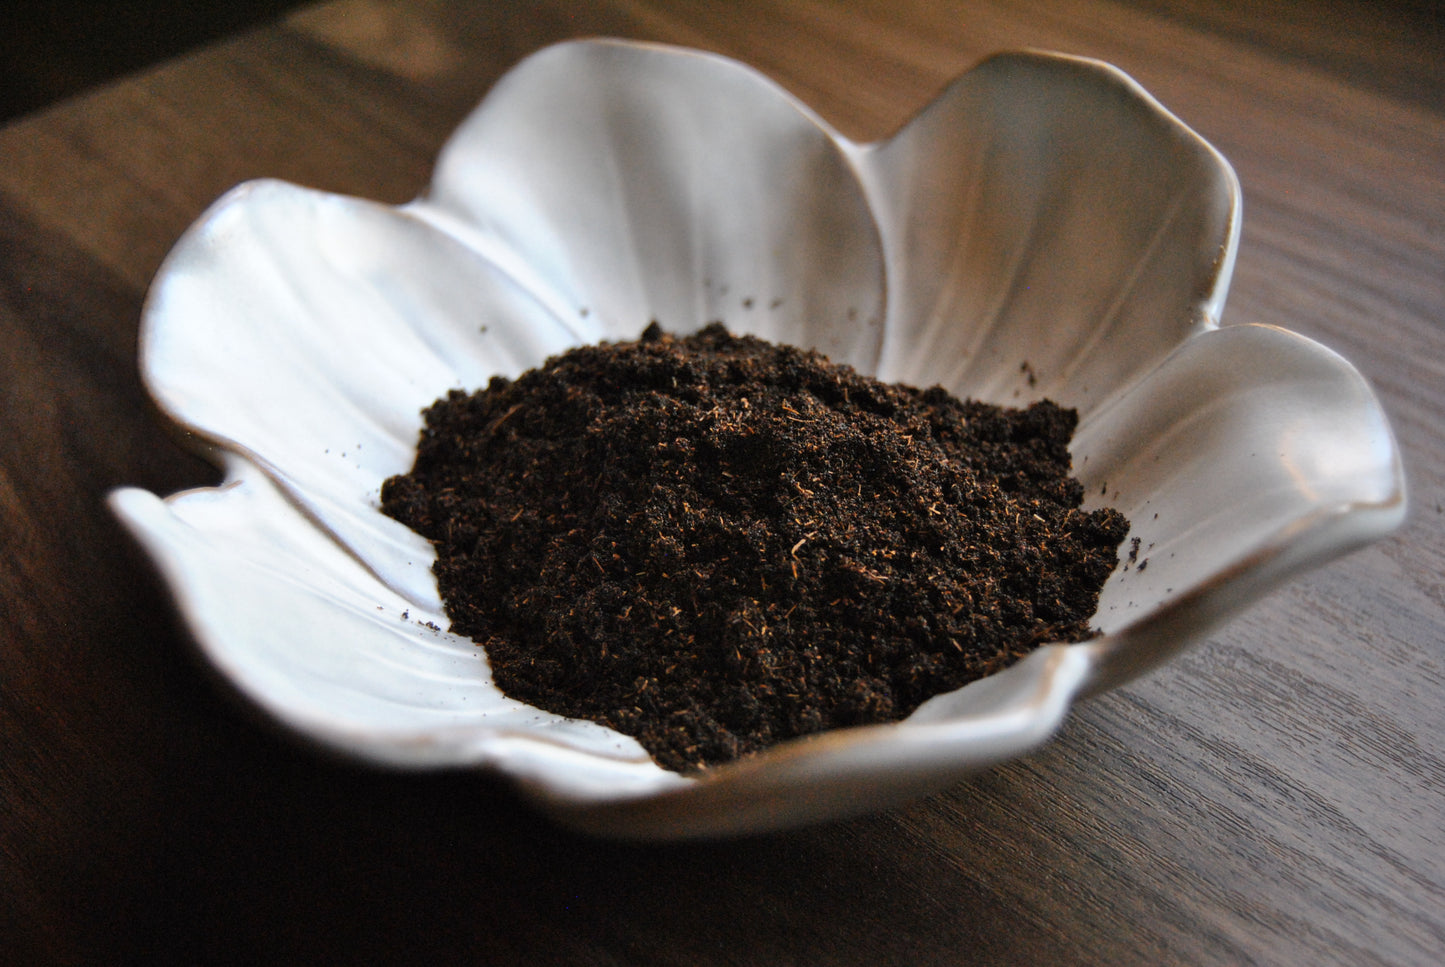 A pile vanilla powder rests in a white, flower shaped dish on a wooden surface. The powder is dark brown in color, with lighter speckles in it.